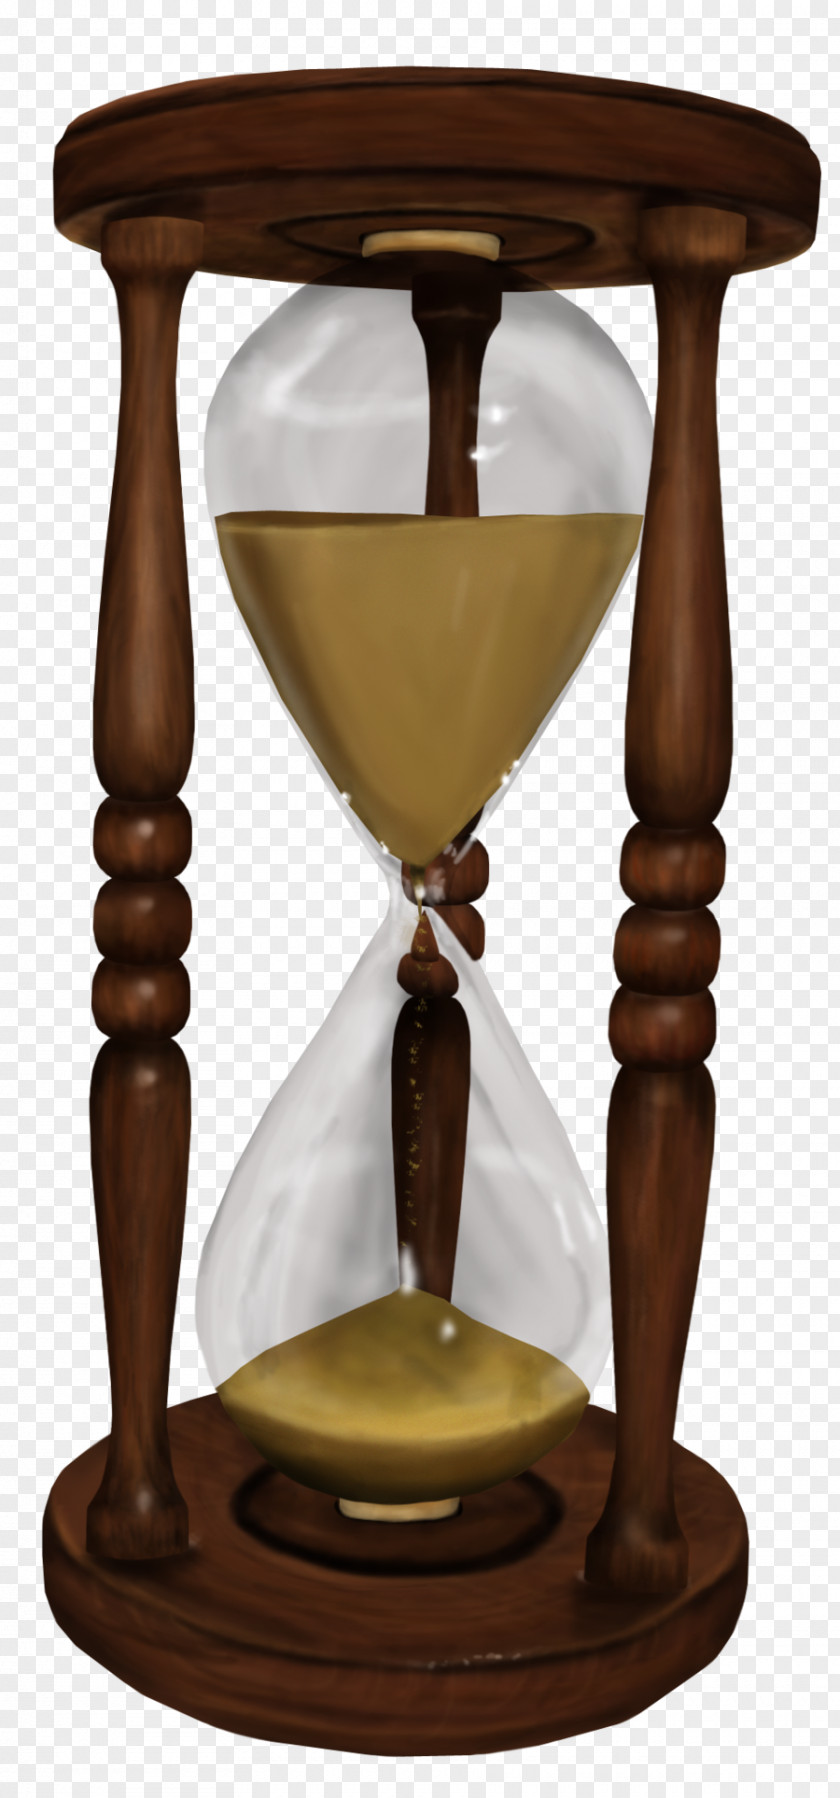 Hourglass Sketch Miami Wise Religion Product Design Spirituality PNG